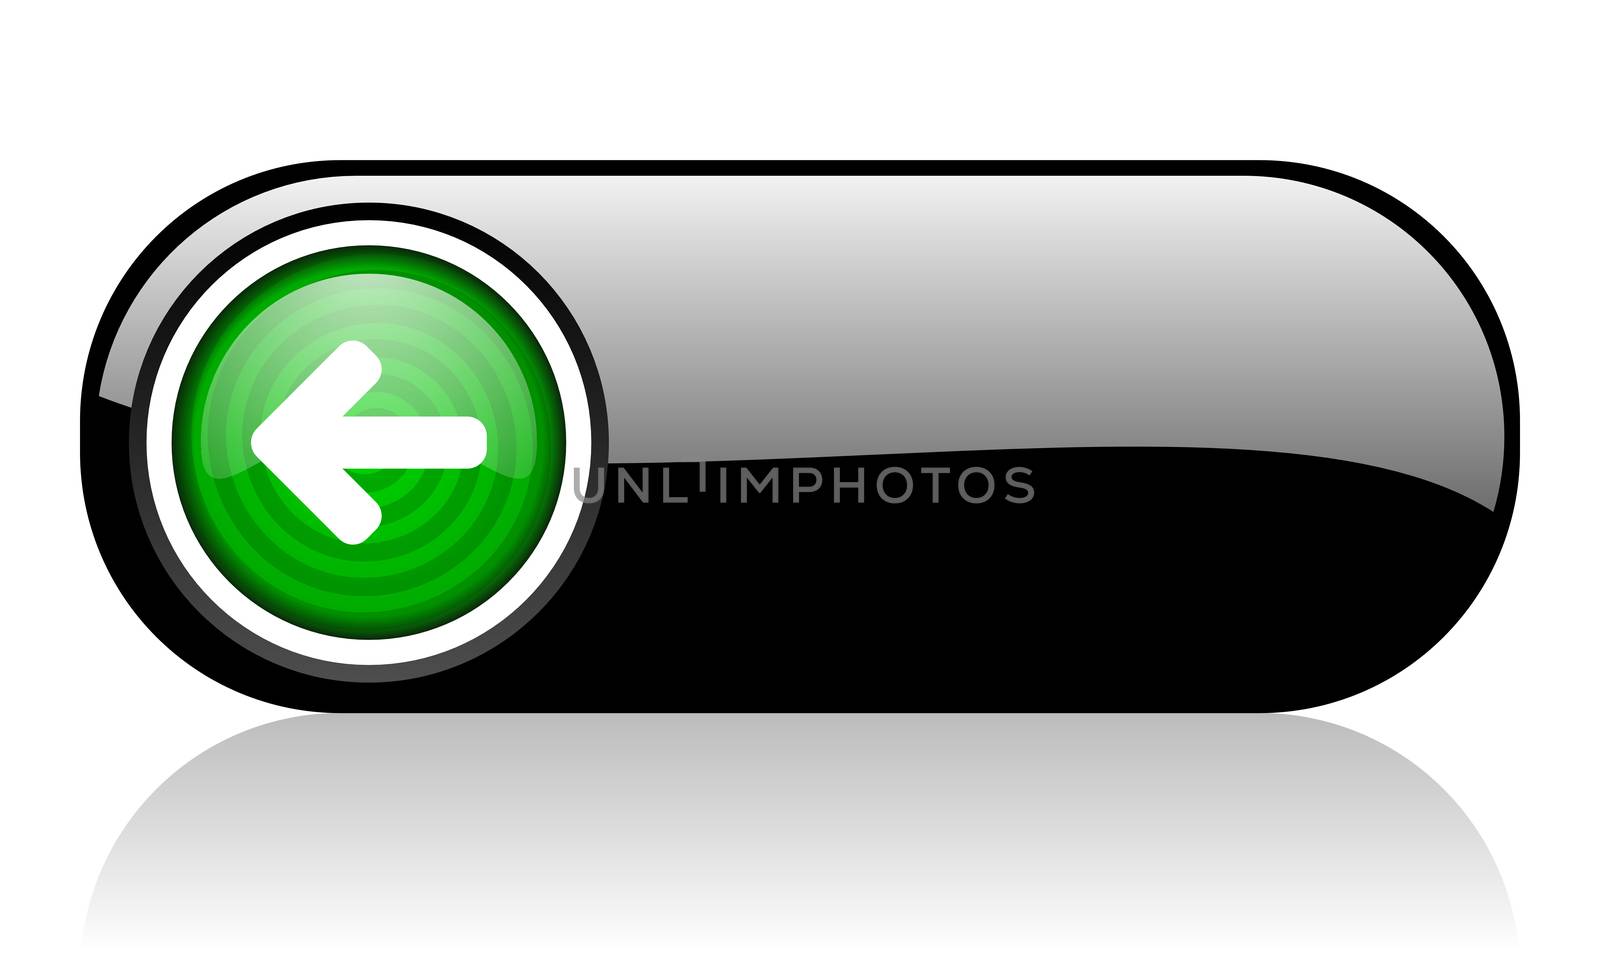 arrow right black and green web icon on white background by alexwhite